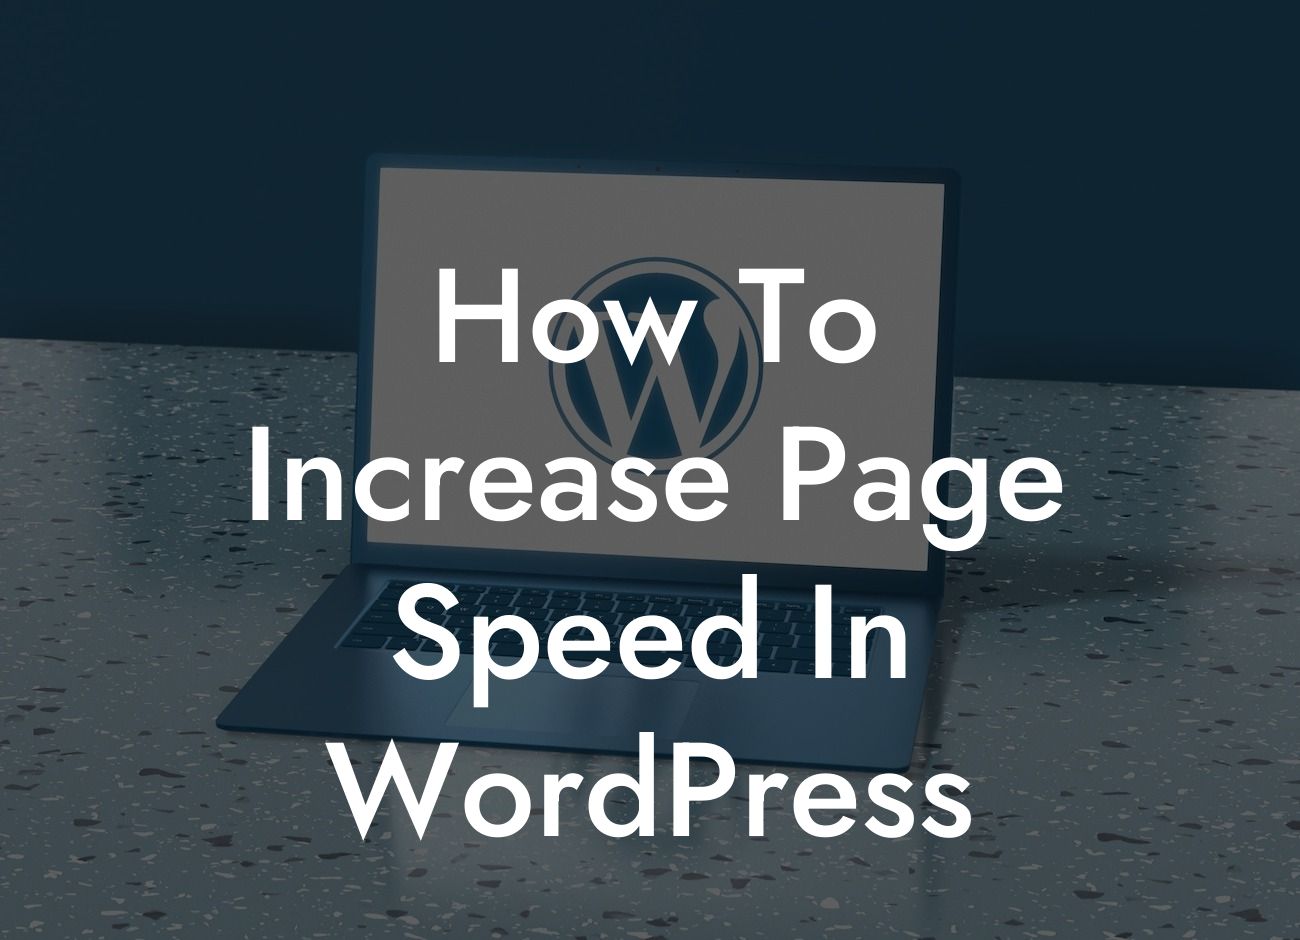 How To Increase Page Speed In WordPress